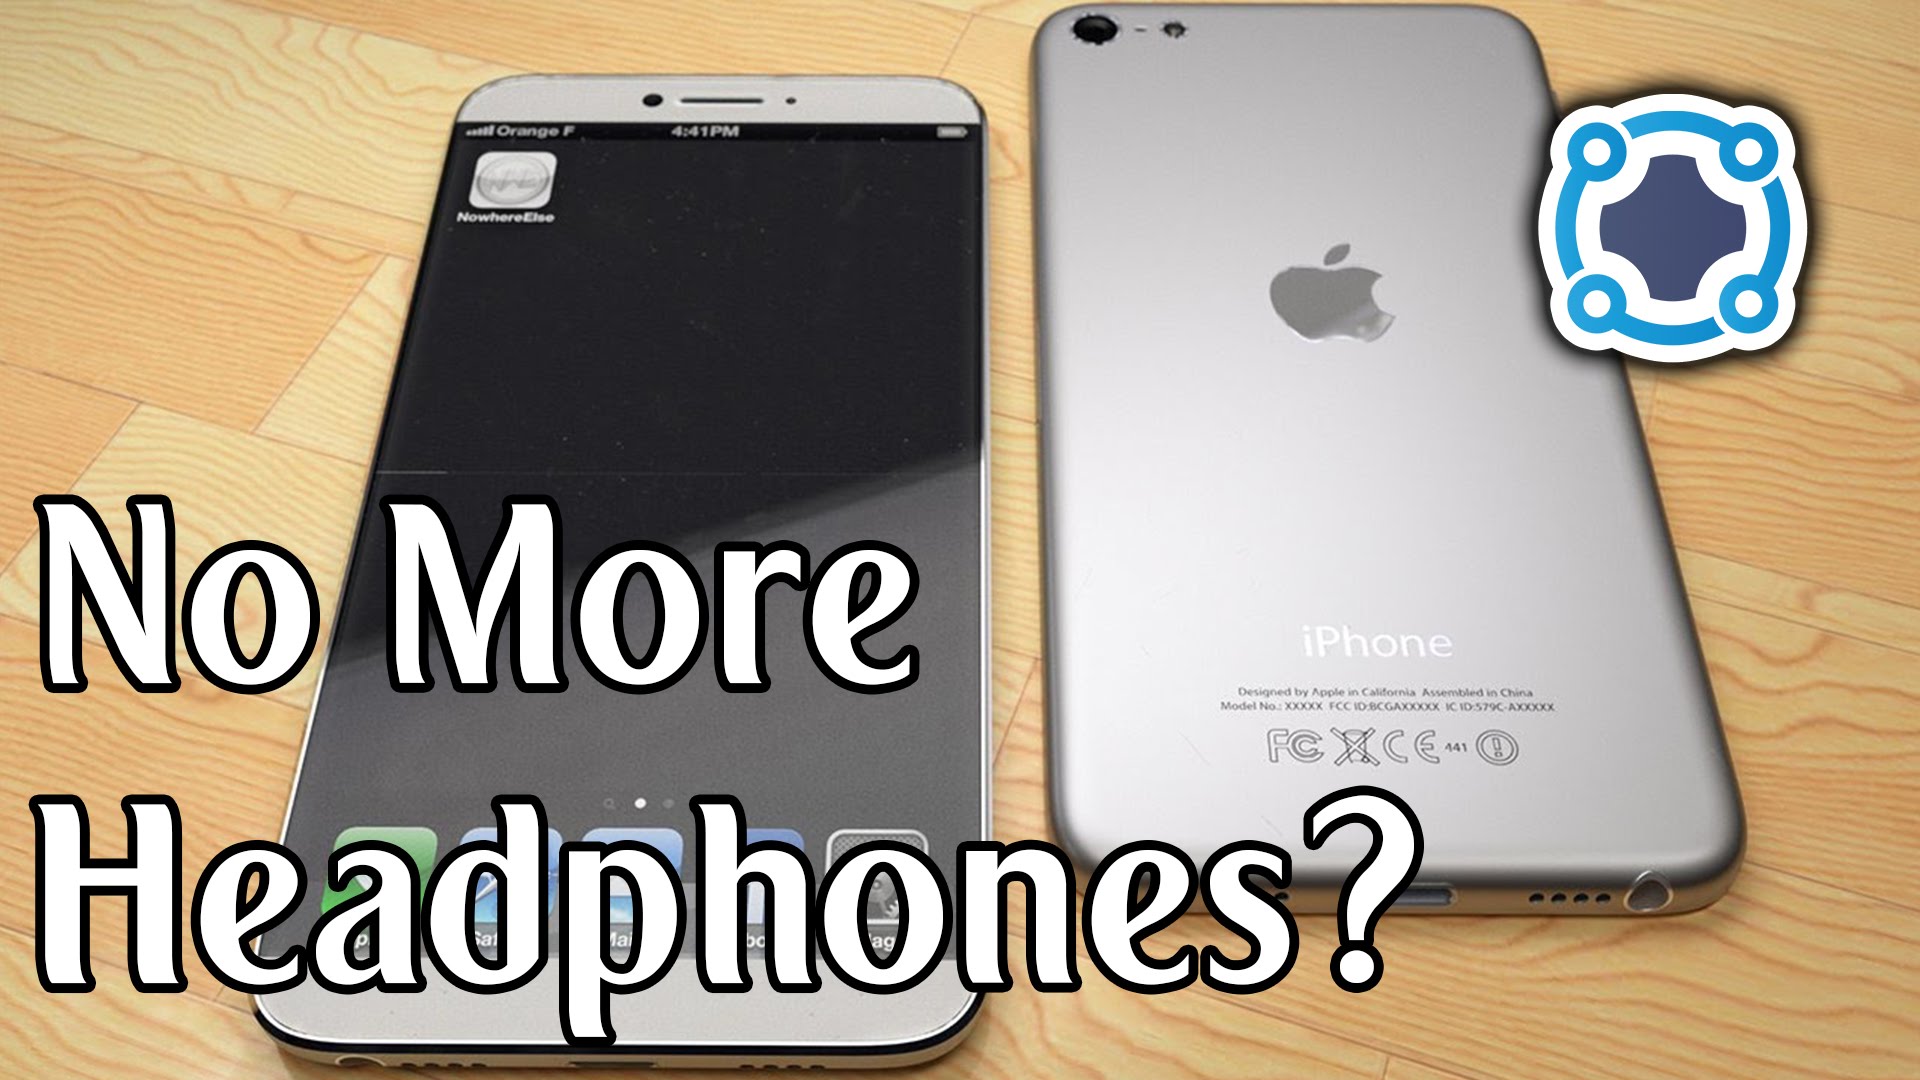 Will A Thinner iPhone Kill The Headphone Jack?